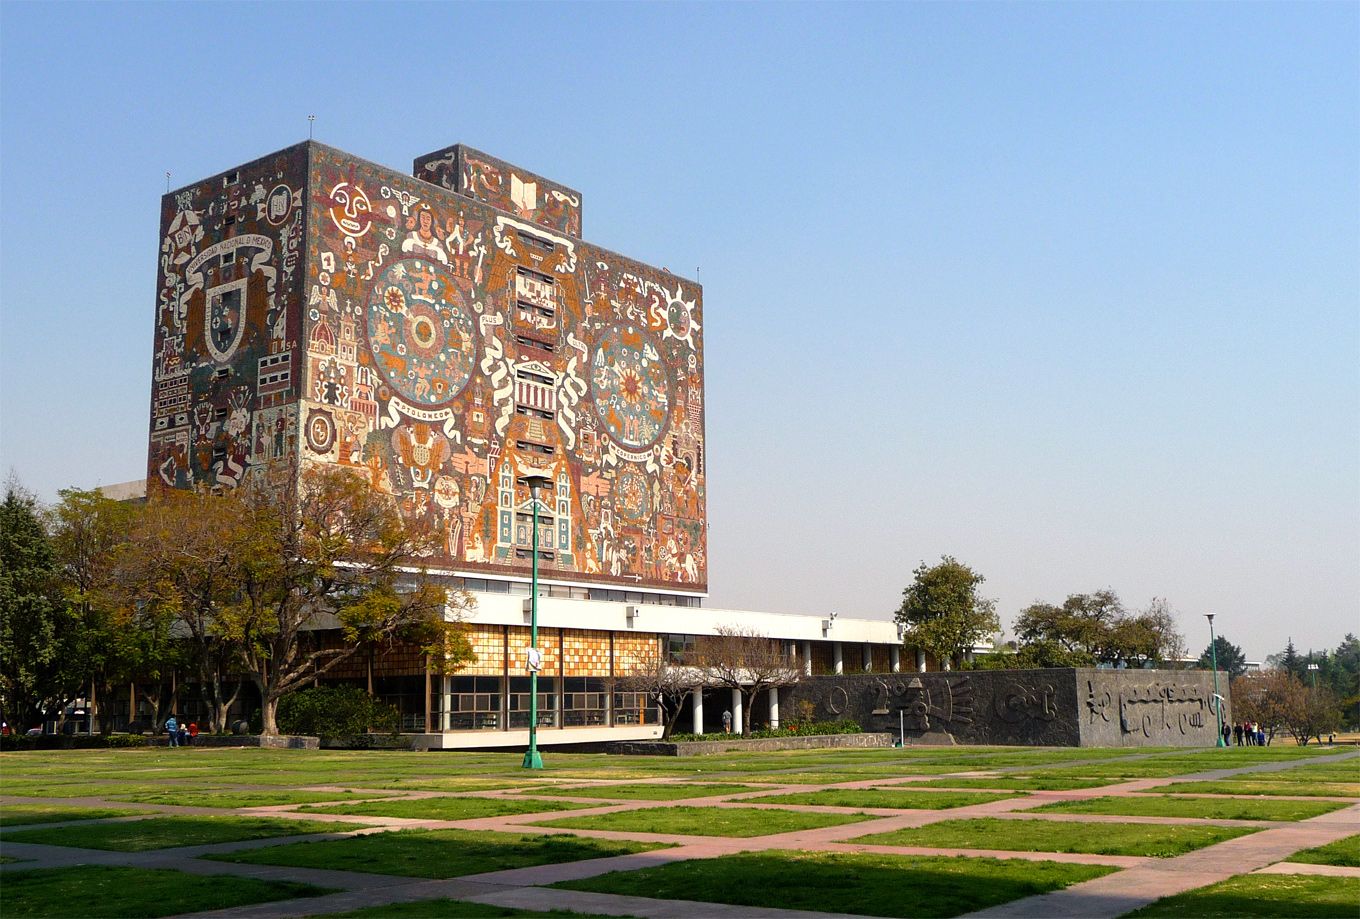 The Central Library on the main campus of the National Autonomous University of Mexico, known as University City, completed in 1954. Image by Carlos Álvarez. Mexico, 2008.